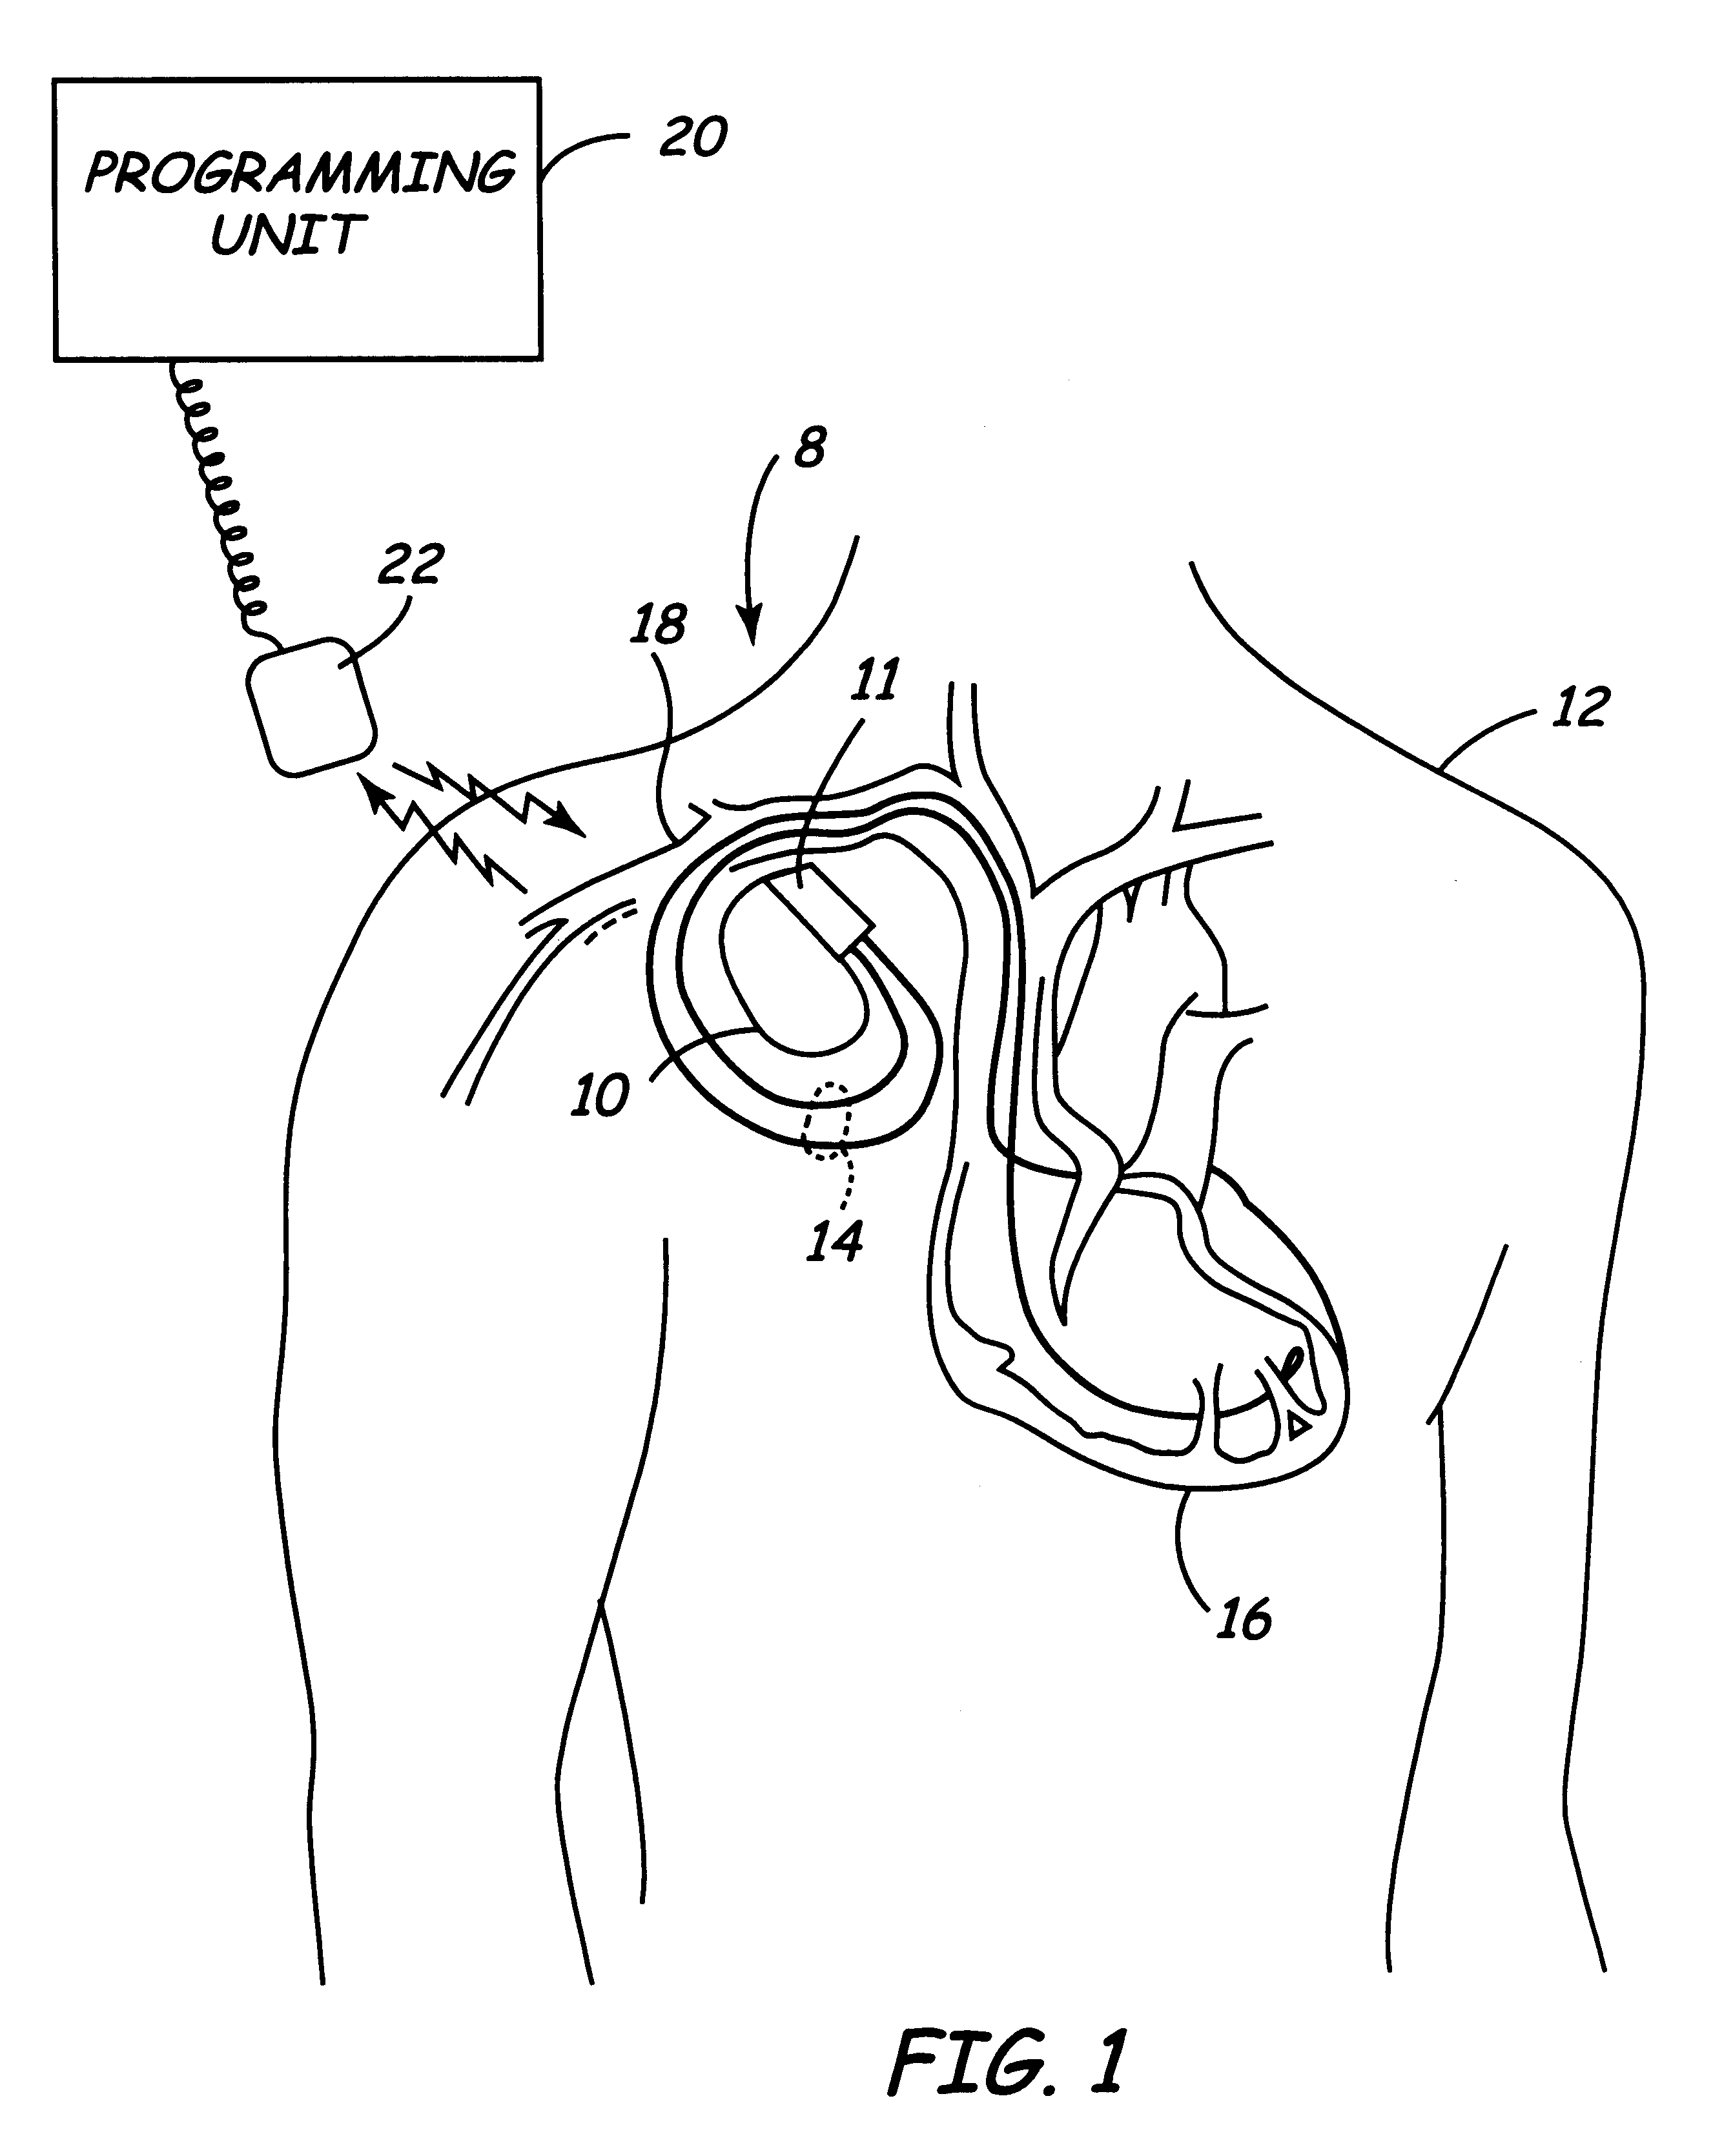 Method and apparatus for displaying information retrieved from an implanted medical device